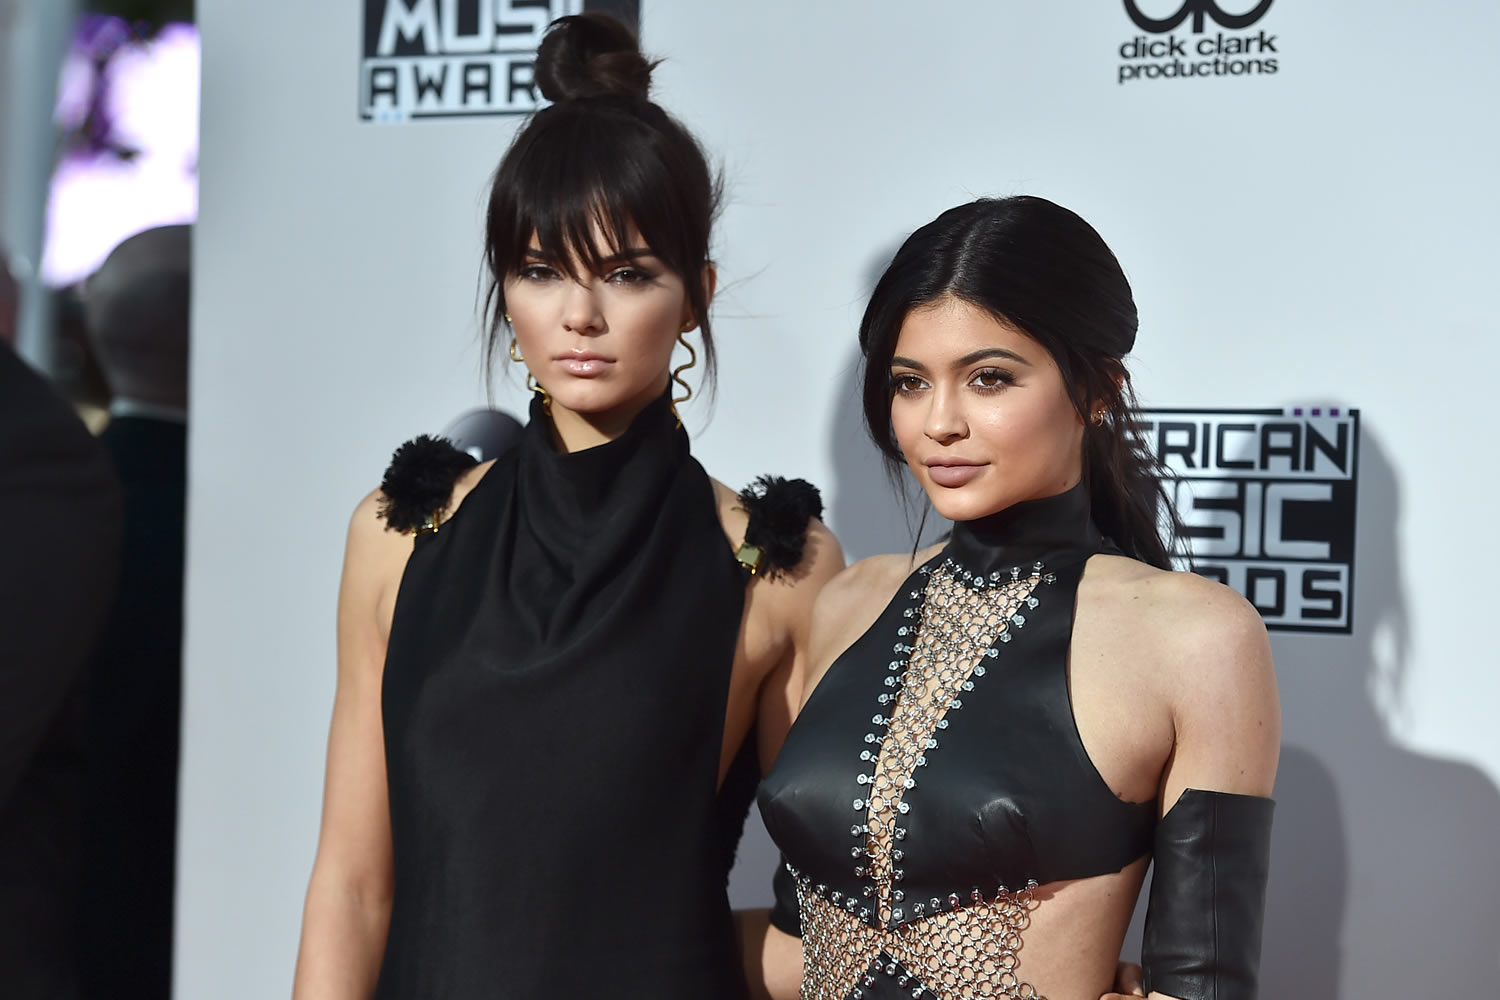 The Jenner sisters’ clash of styles